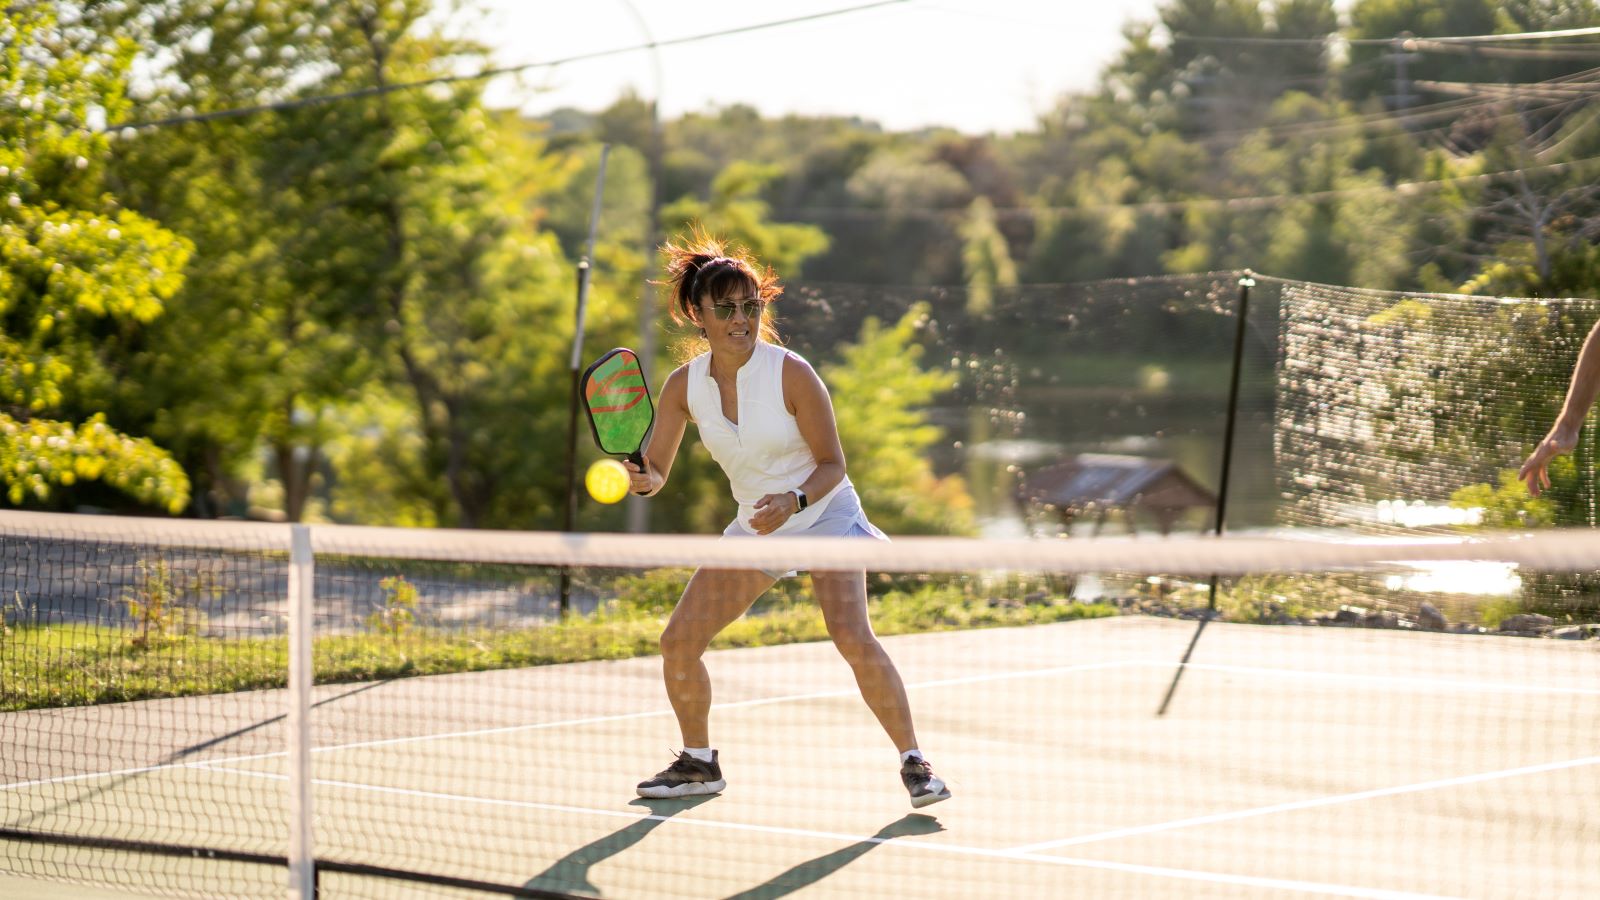 This Five-Minute Warm-Up Could Boost Your Pickleball or Tennis Game